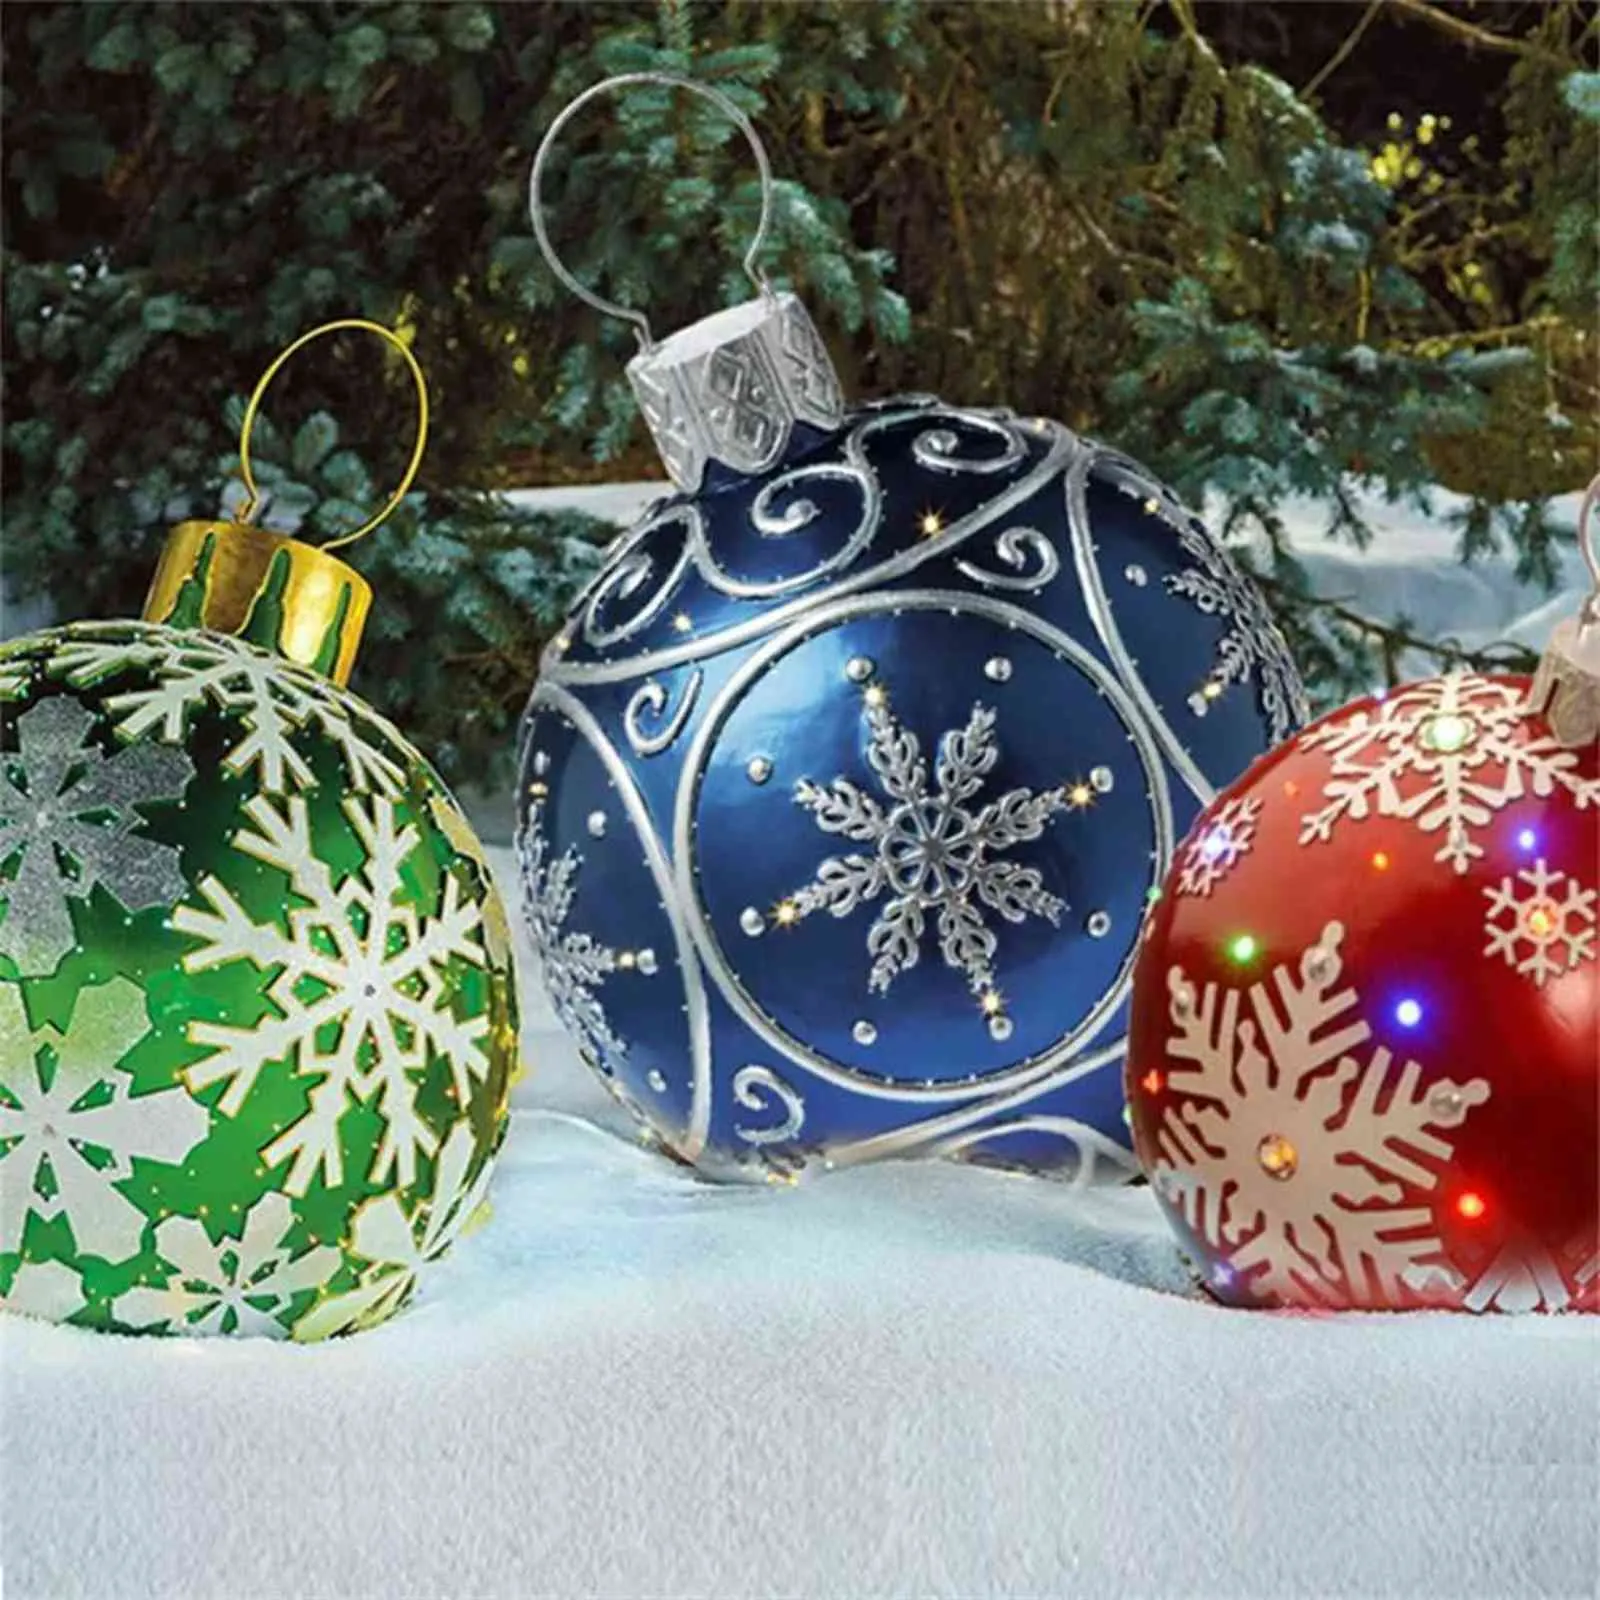 60Cm Large Christmas Balls Tree Decorations Outdoor Atmosphere Inflatable Baubles Toys for Home Gift Ball Ornament 21110577915111417585